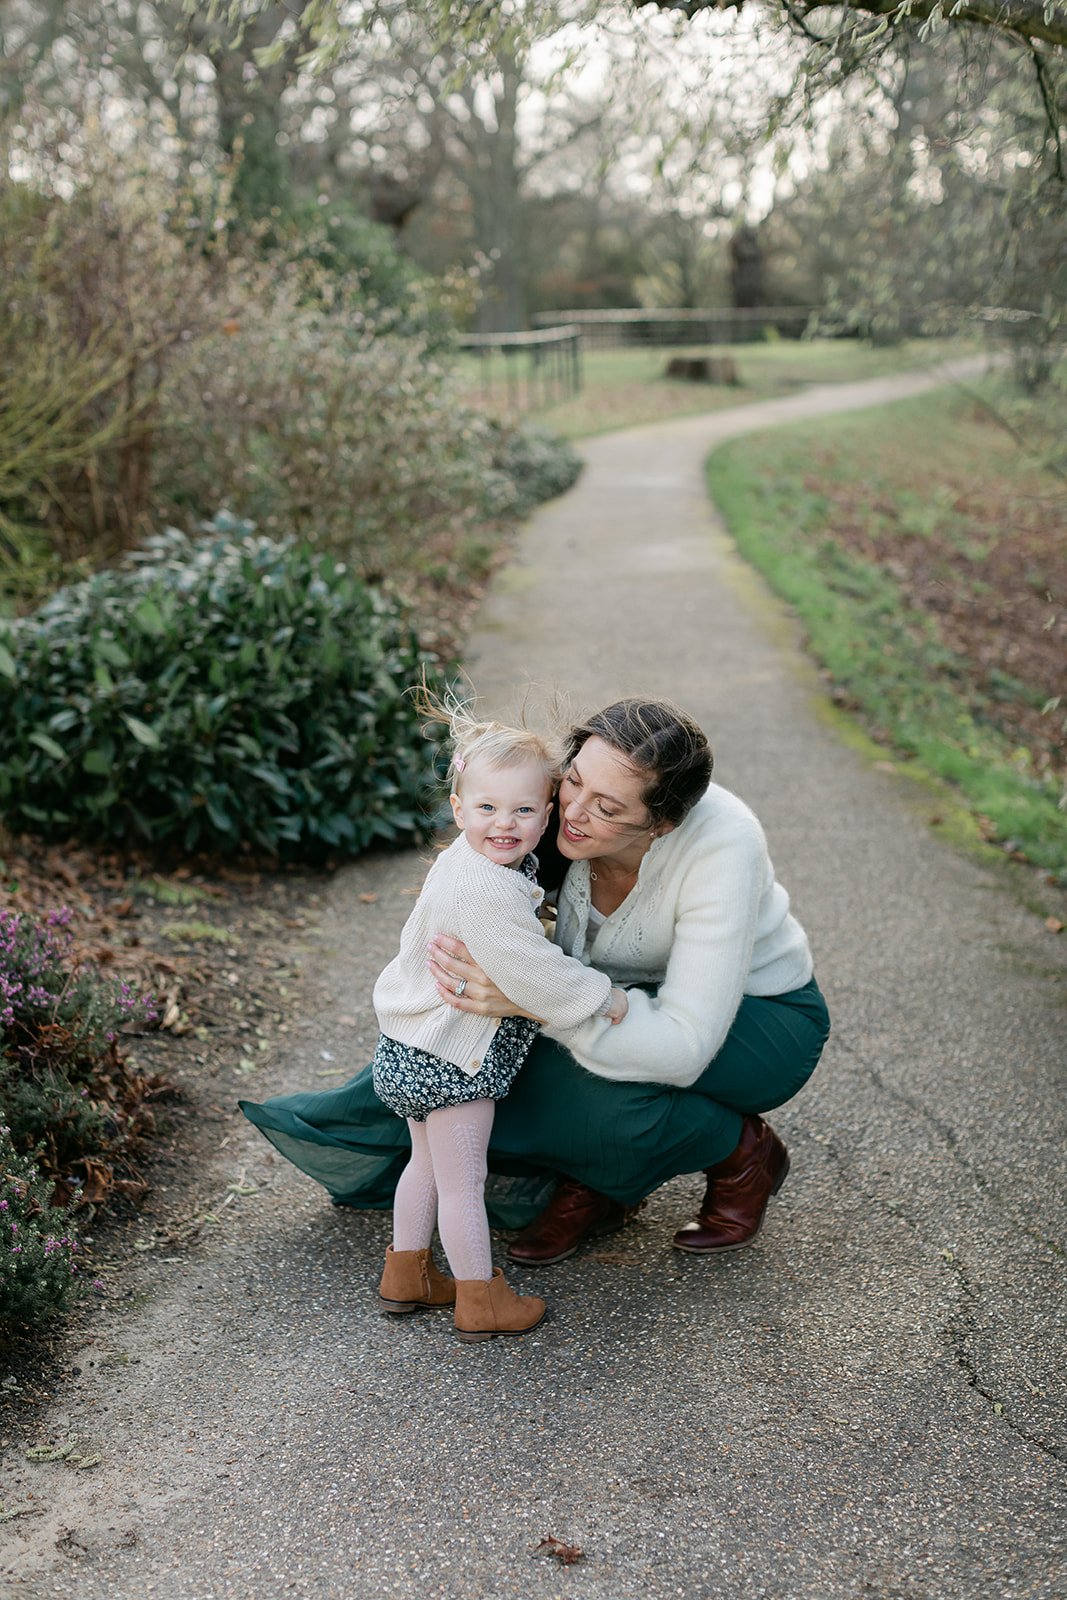  Family photographer captures mother and daughter hugging  in richmond park London 